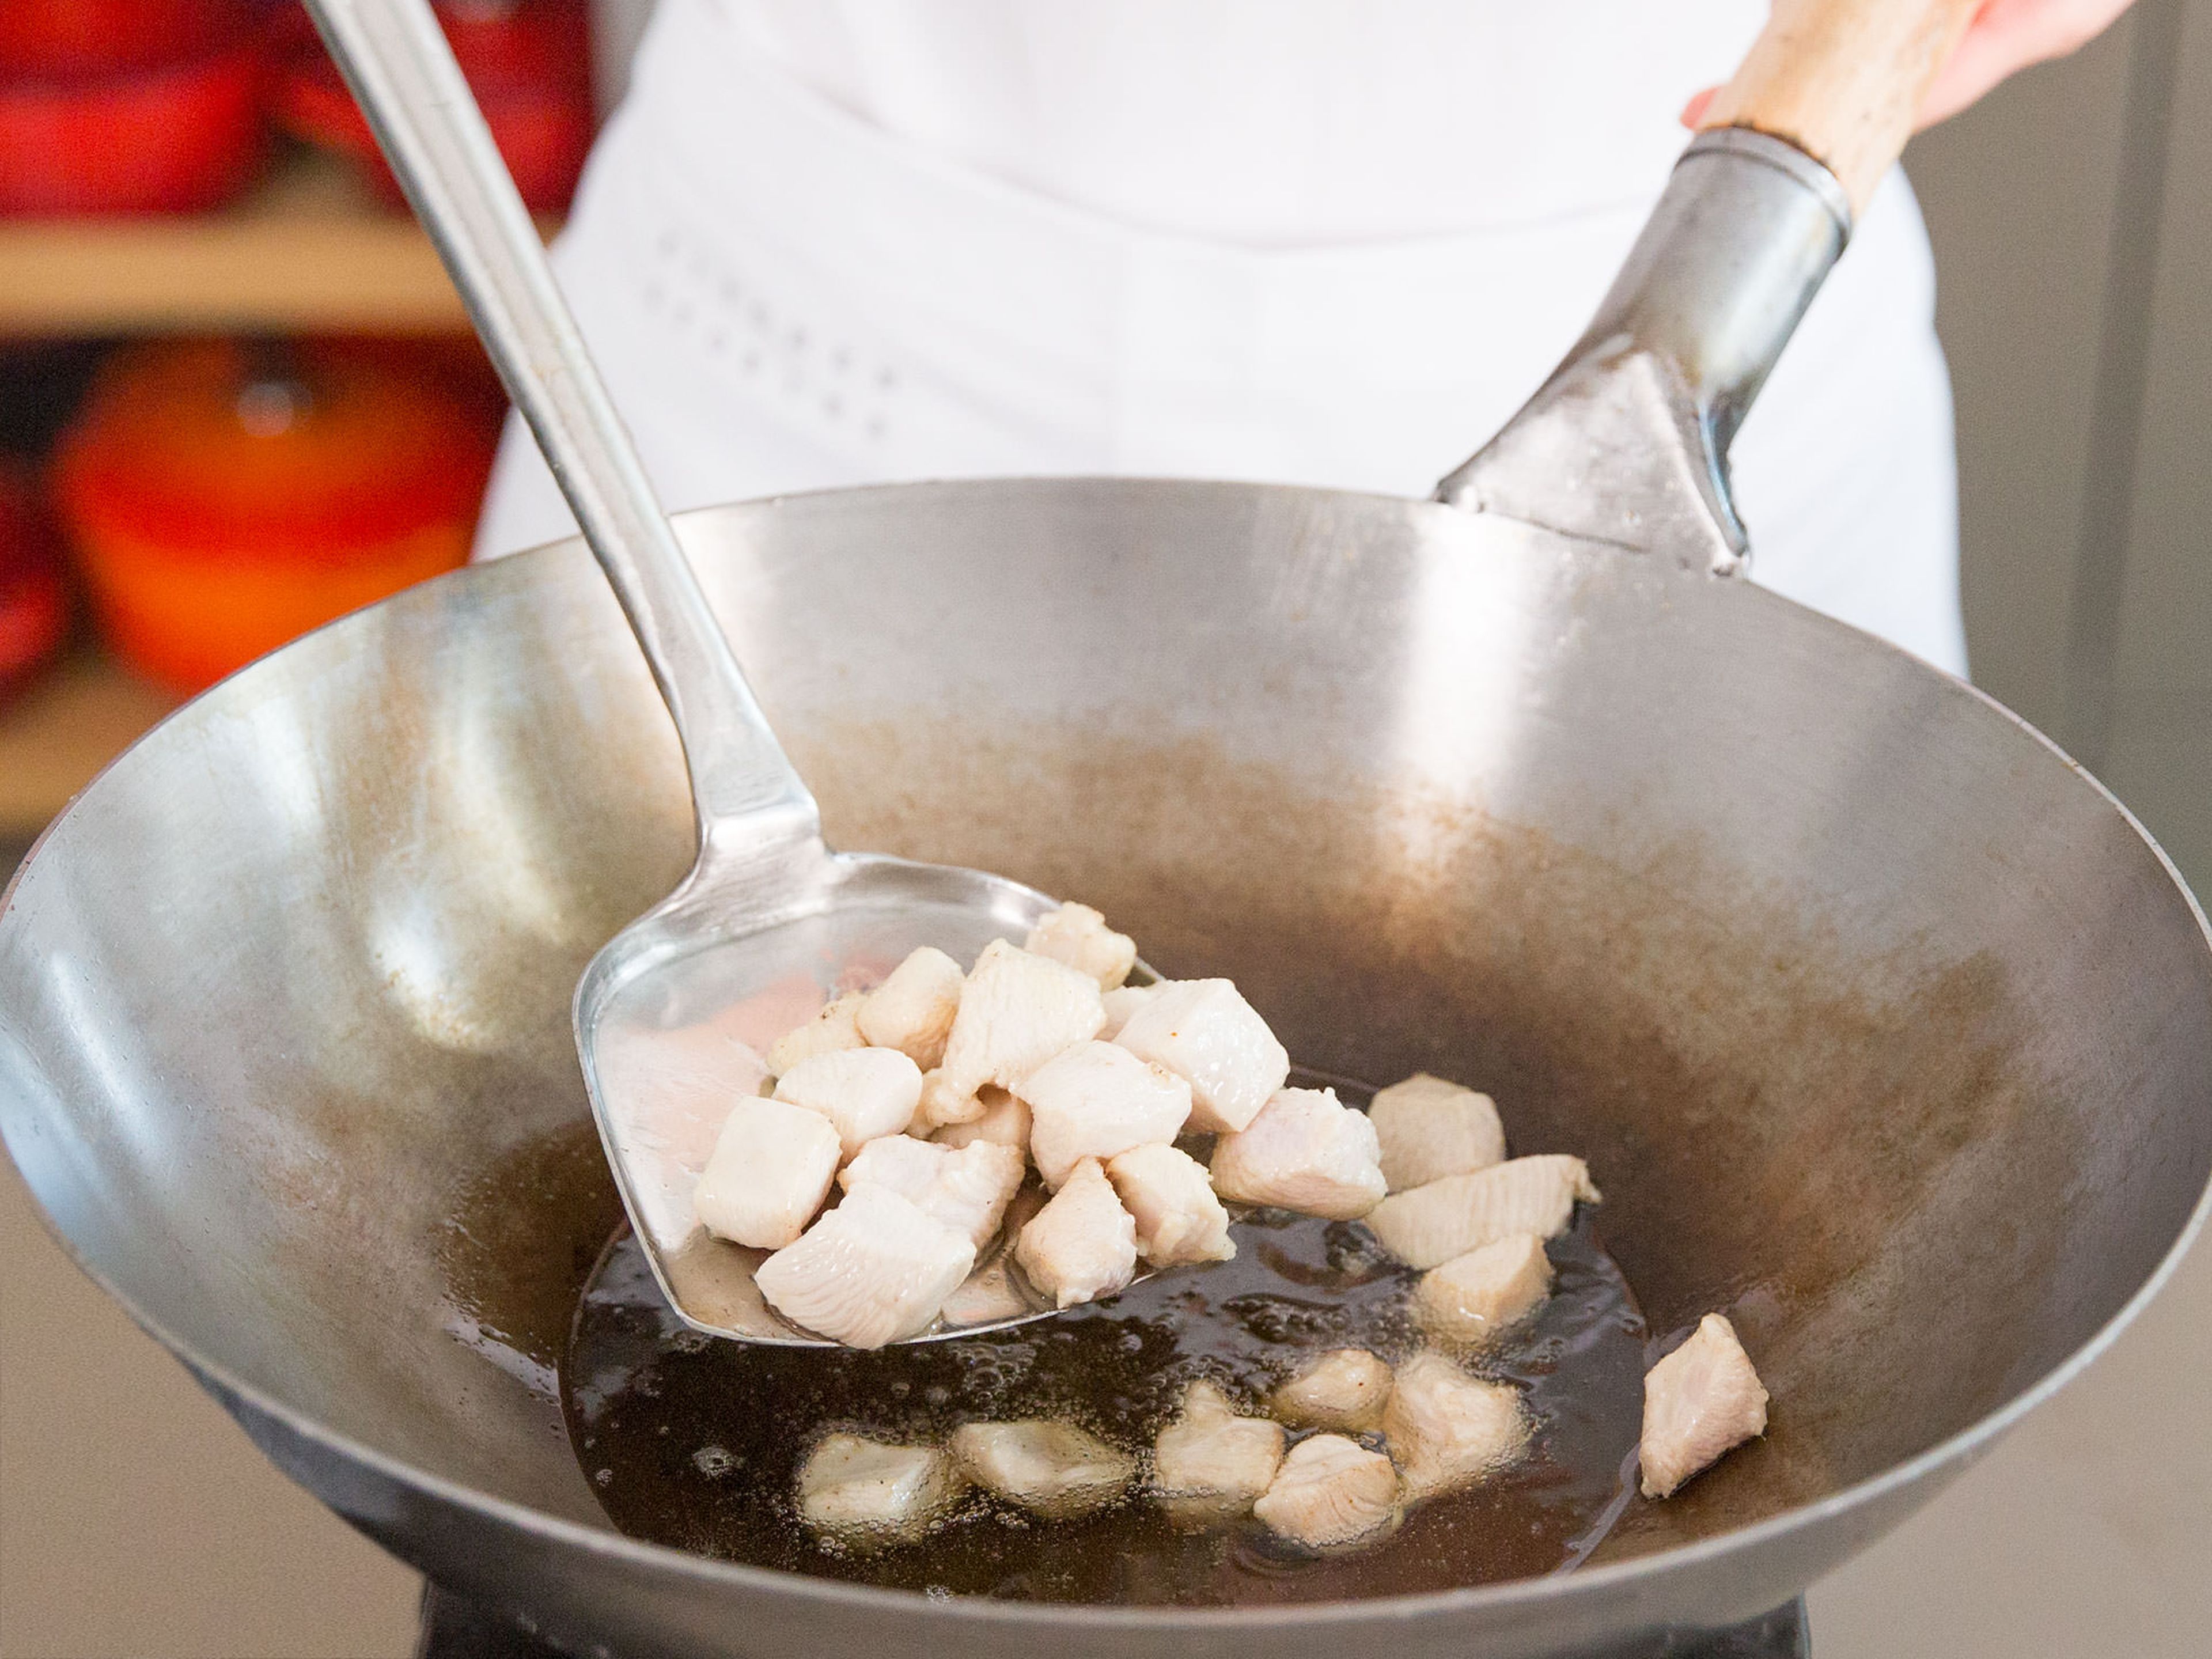 Add chicken to wok and fry for approx. 6 – 7 min., until almost cooked through. Transfer to paper towels and set aside. Make sure to keep the slurry in the bowl.